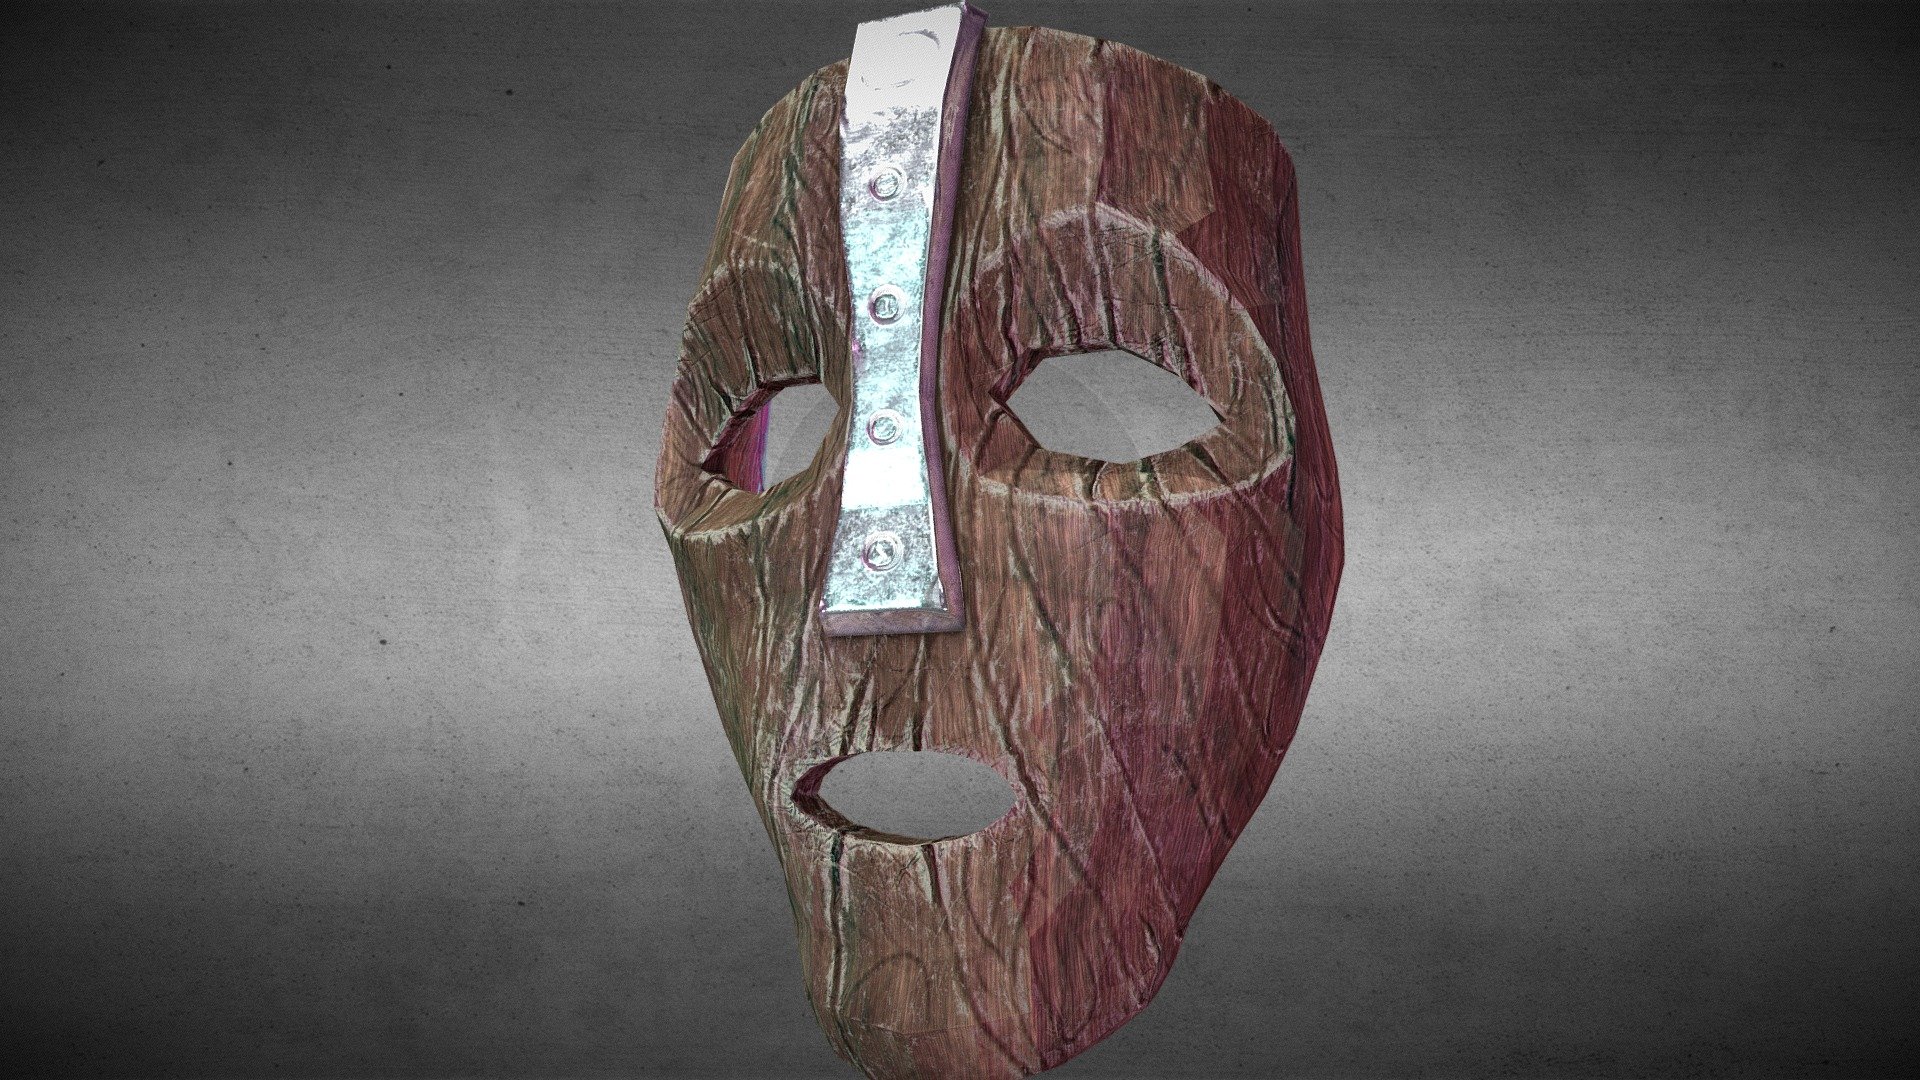 The Wooden Mask